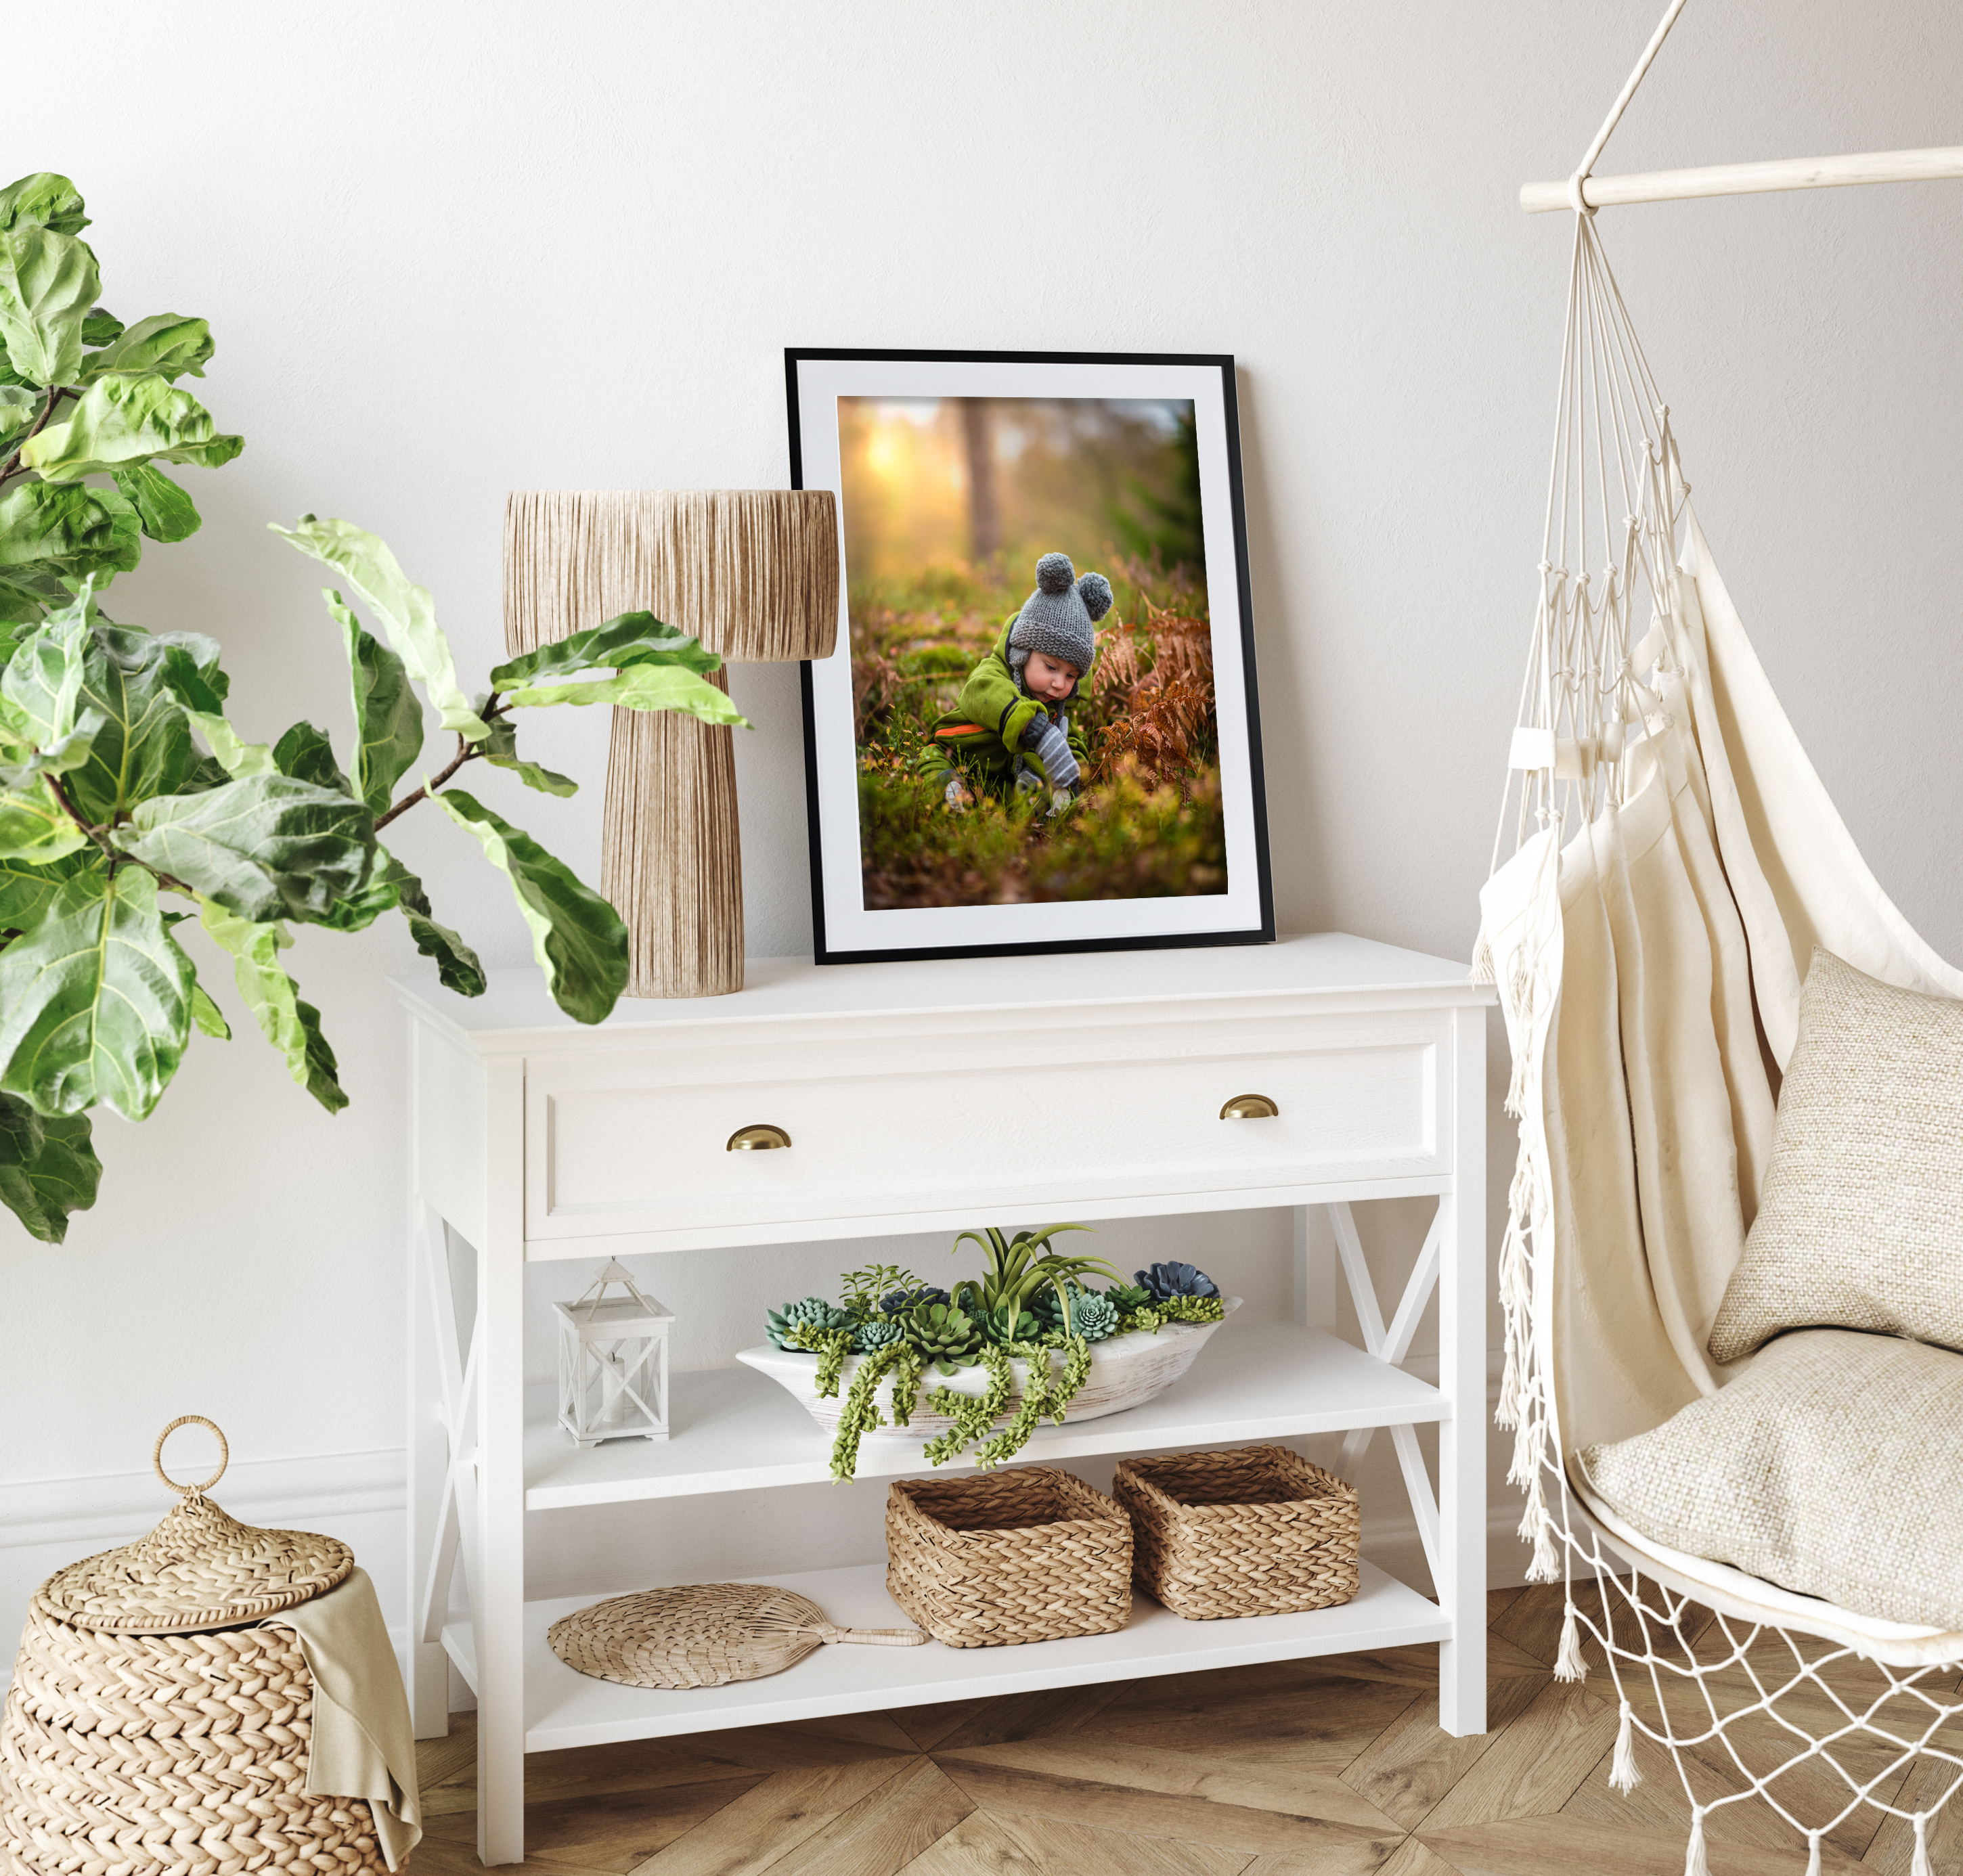 Framed print of child playing with leaves